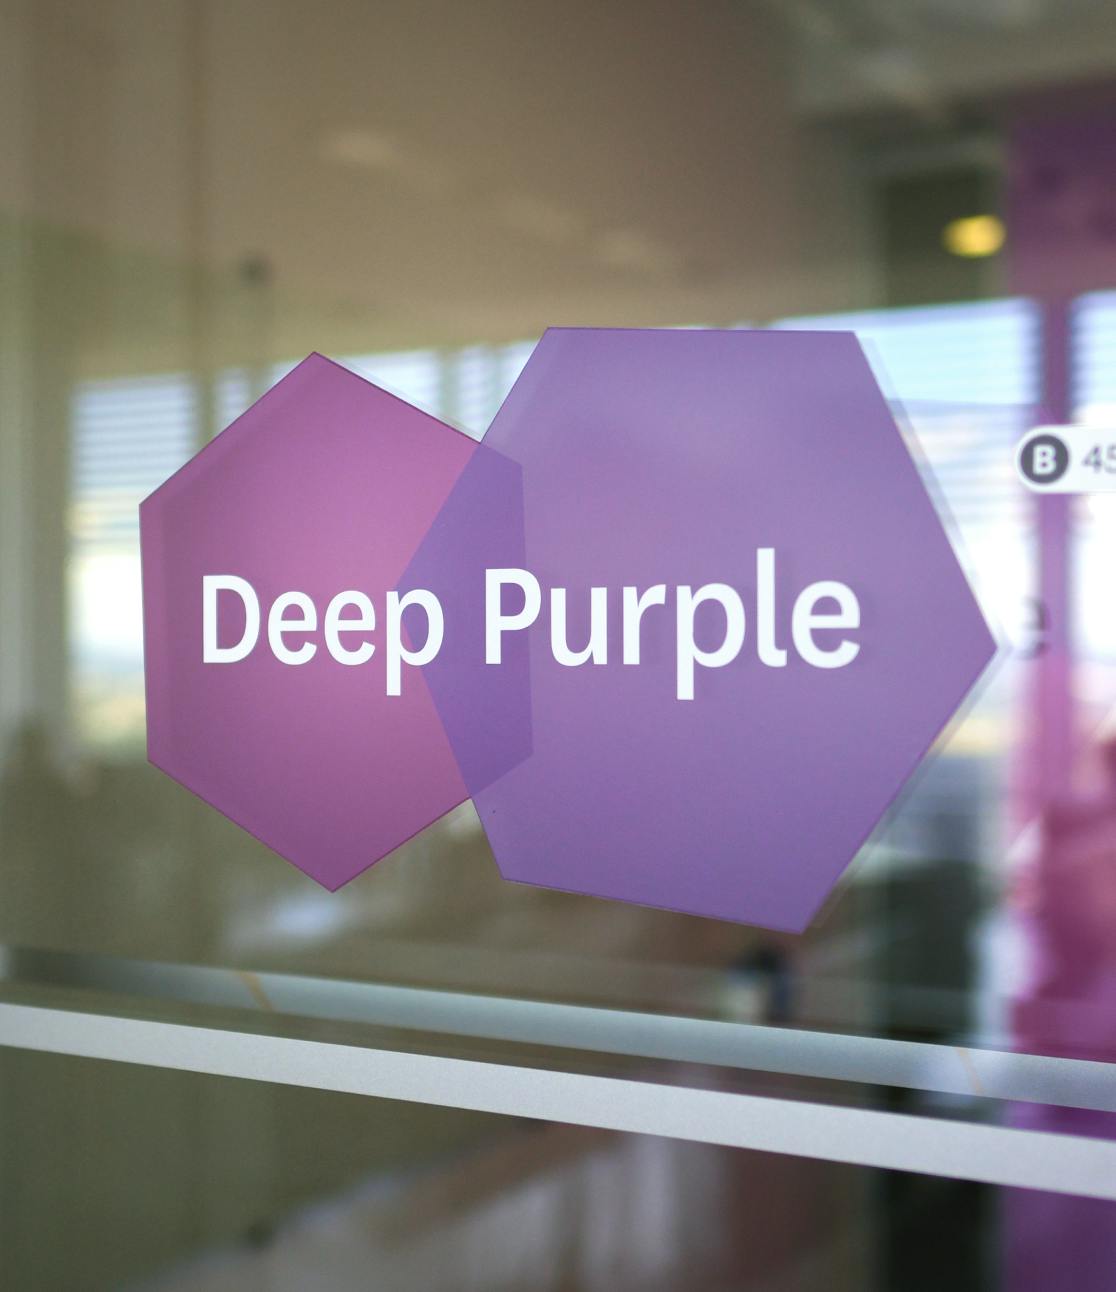 A close up photograph of a conference room sign adhered to the glass wall of a Datadog conference room. The sign is comprised of two purple hexagons, one overlapping the other, with the conference room name, 'Deep Purple' in bold lettering on top of the layered shape.